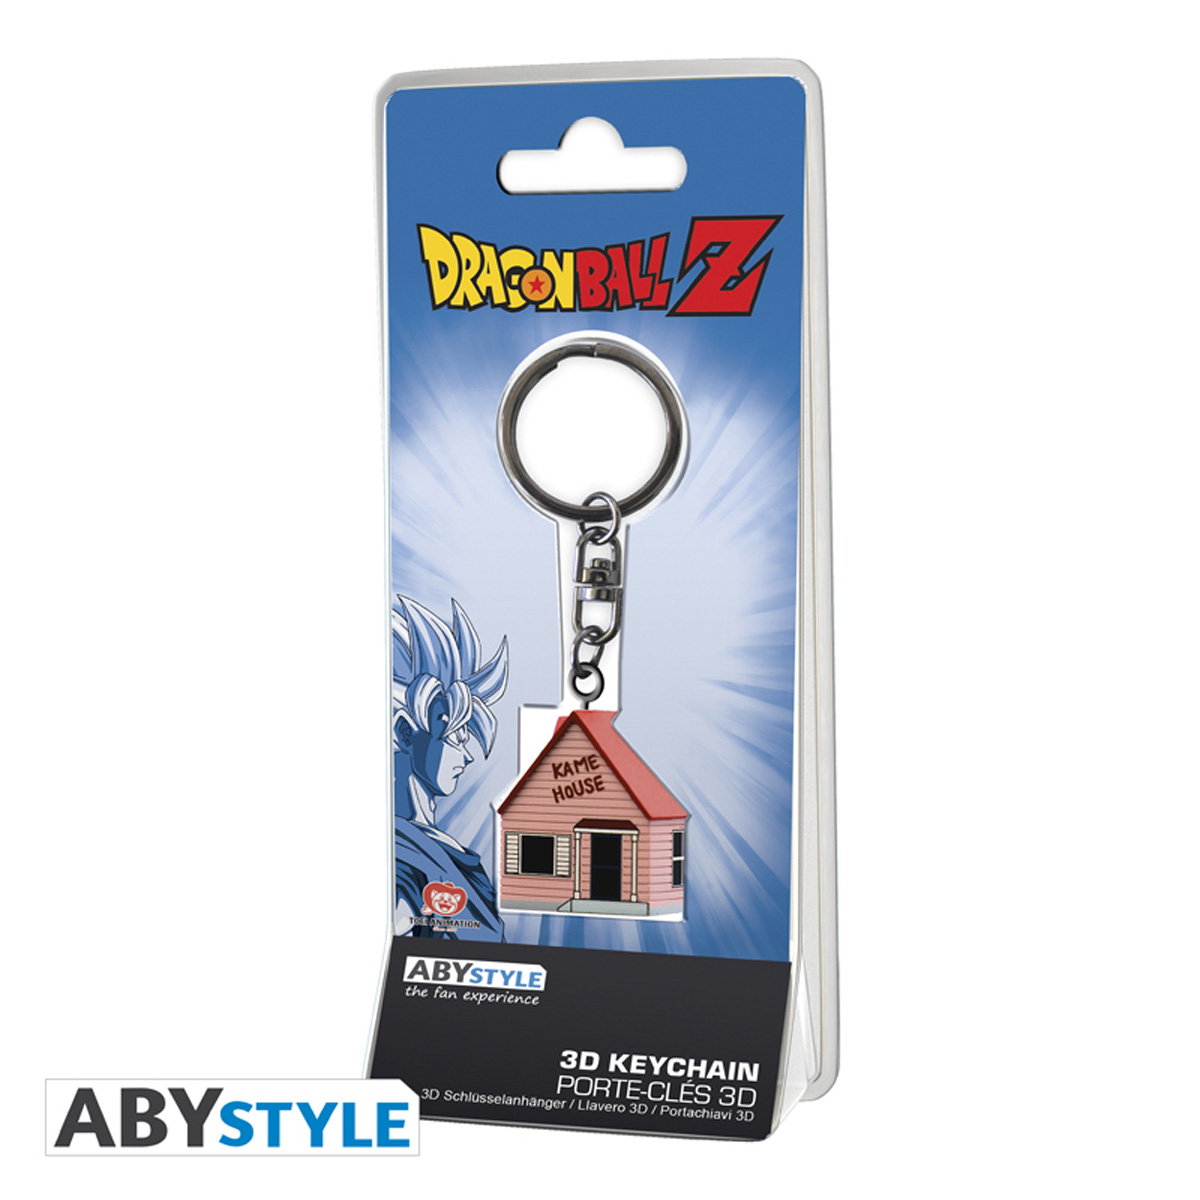 Kame House Dragon Ball Z 3D Keychain image count 3